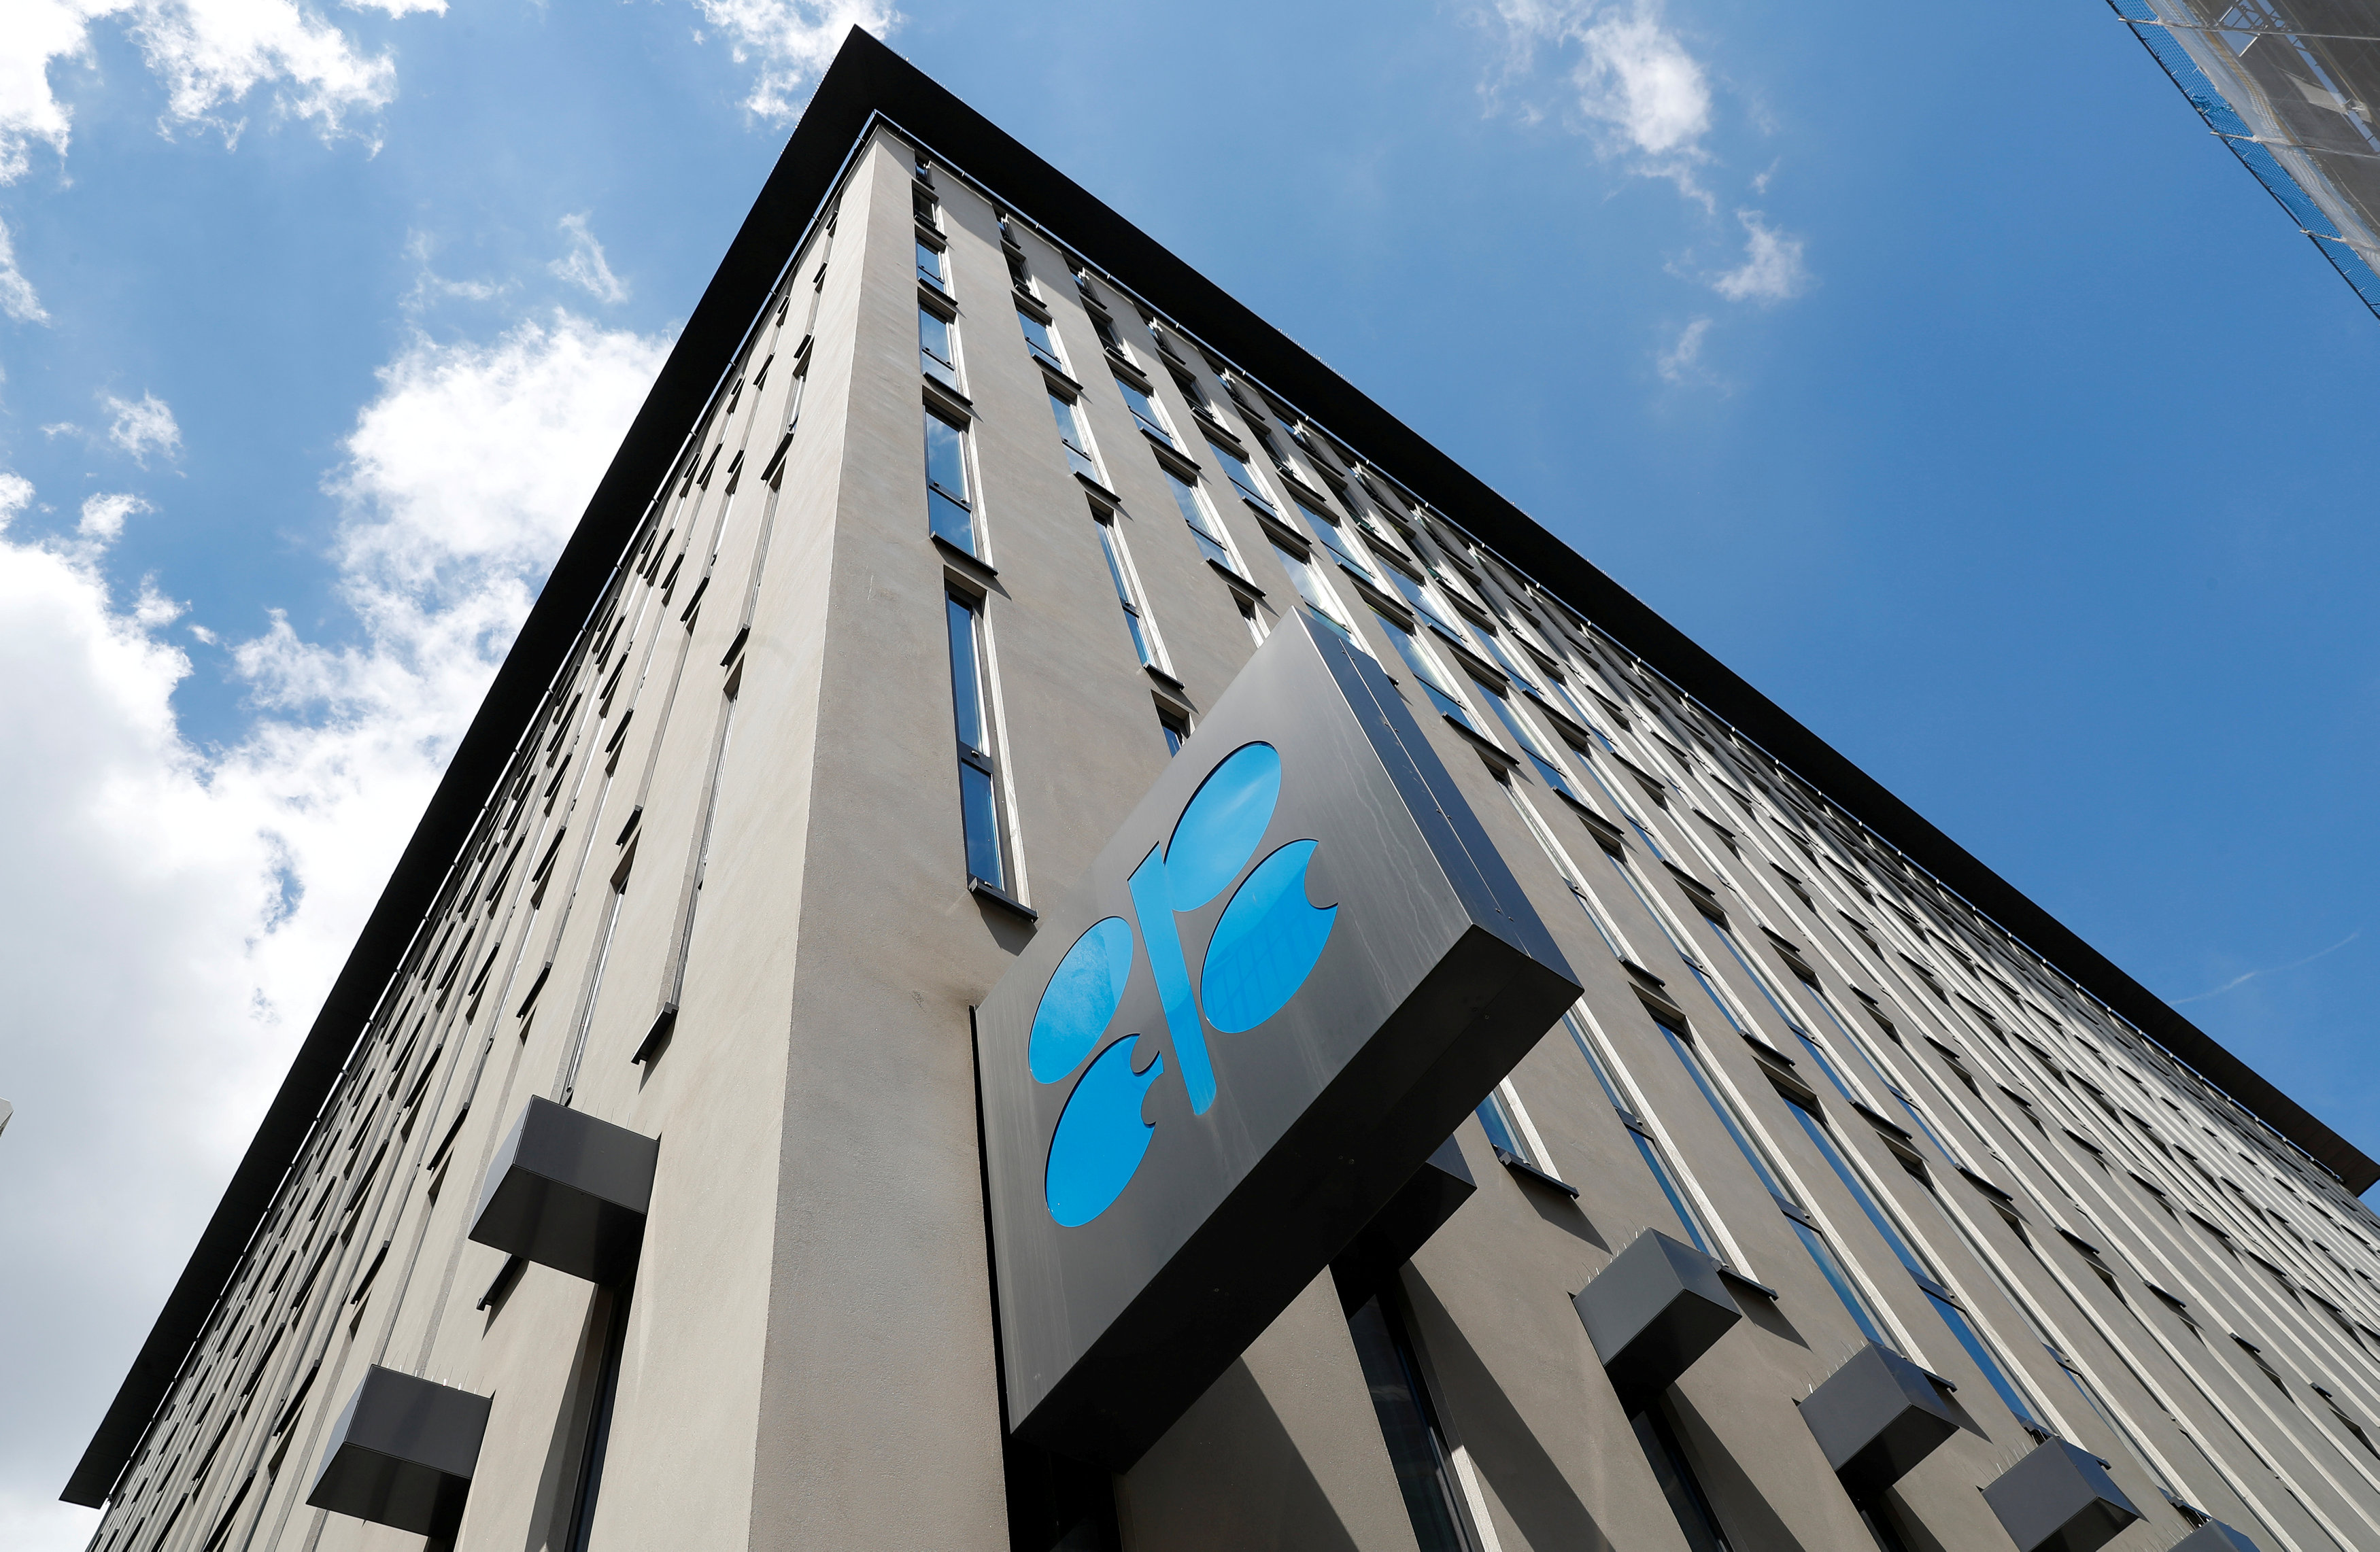 Opec and allies struggle to pump more oil